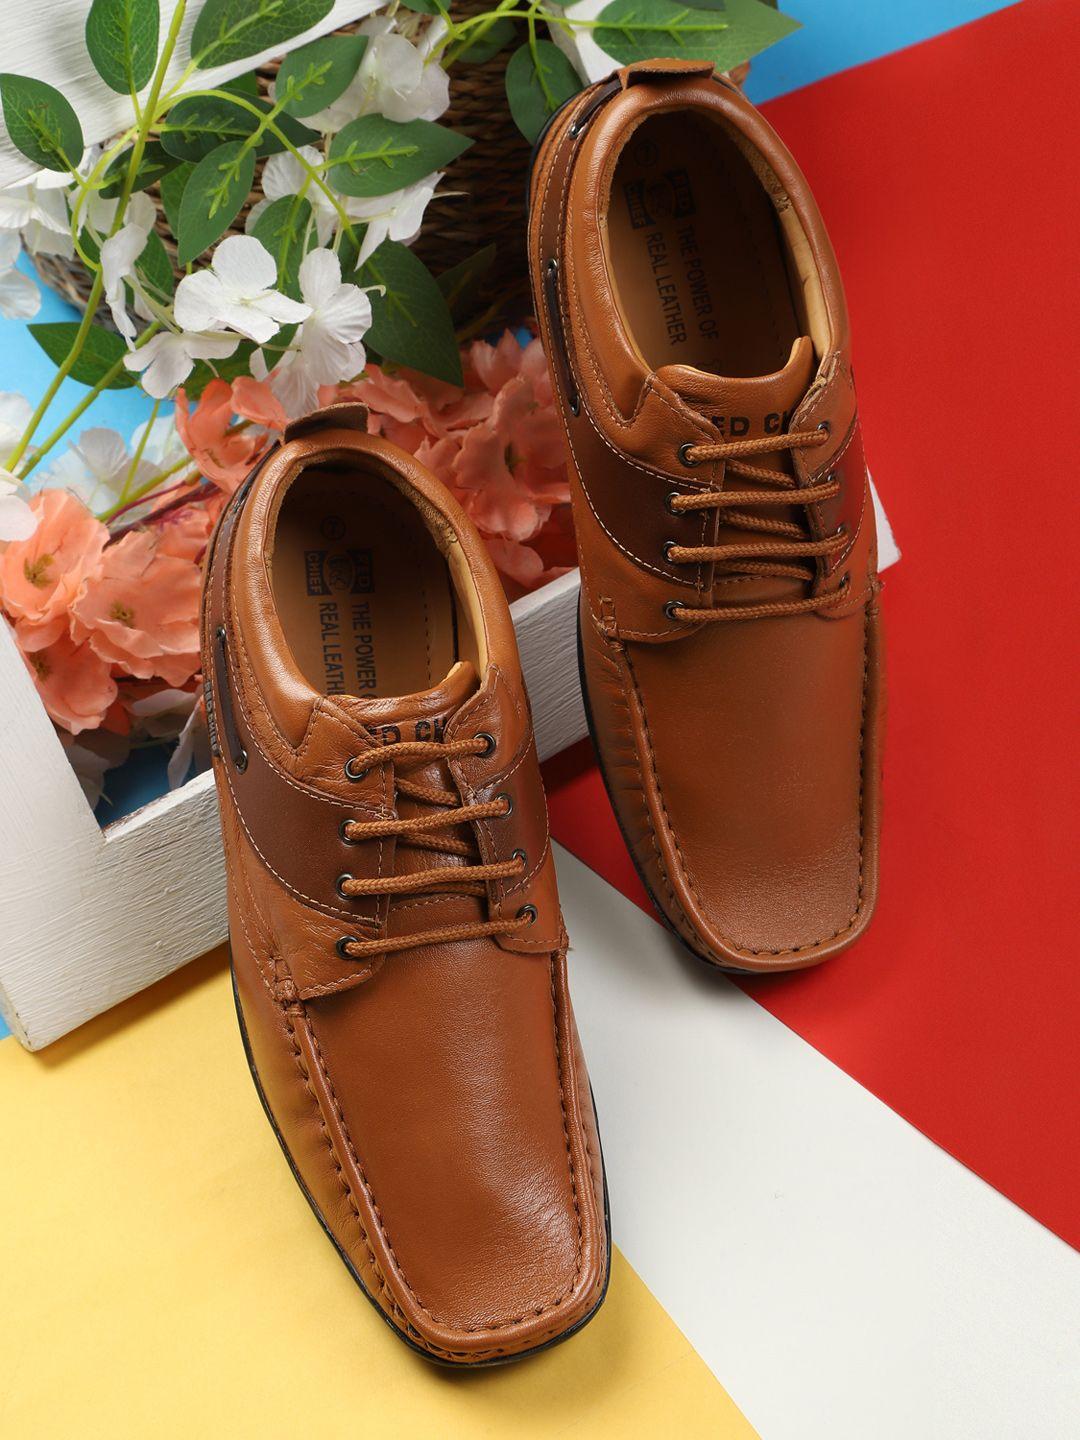 Red Chief Men Tan Leather Derbys